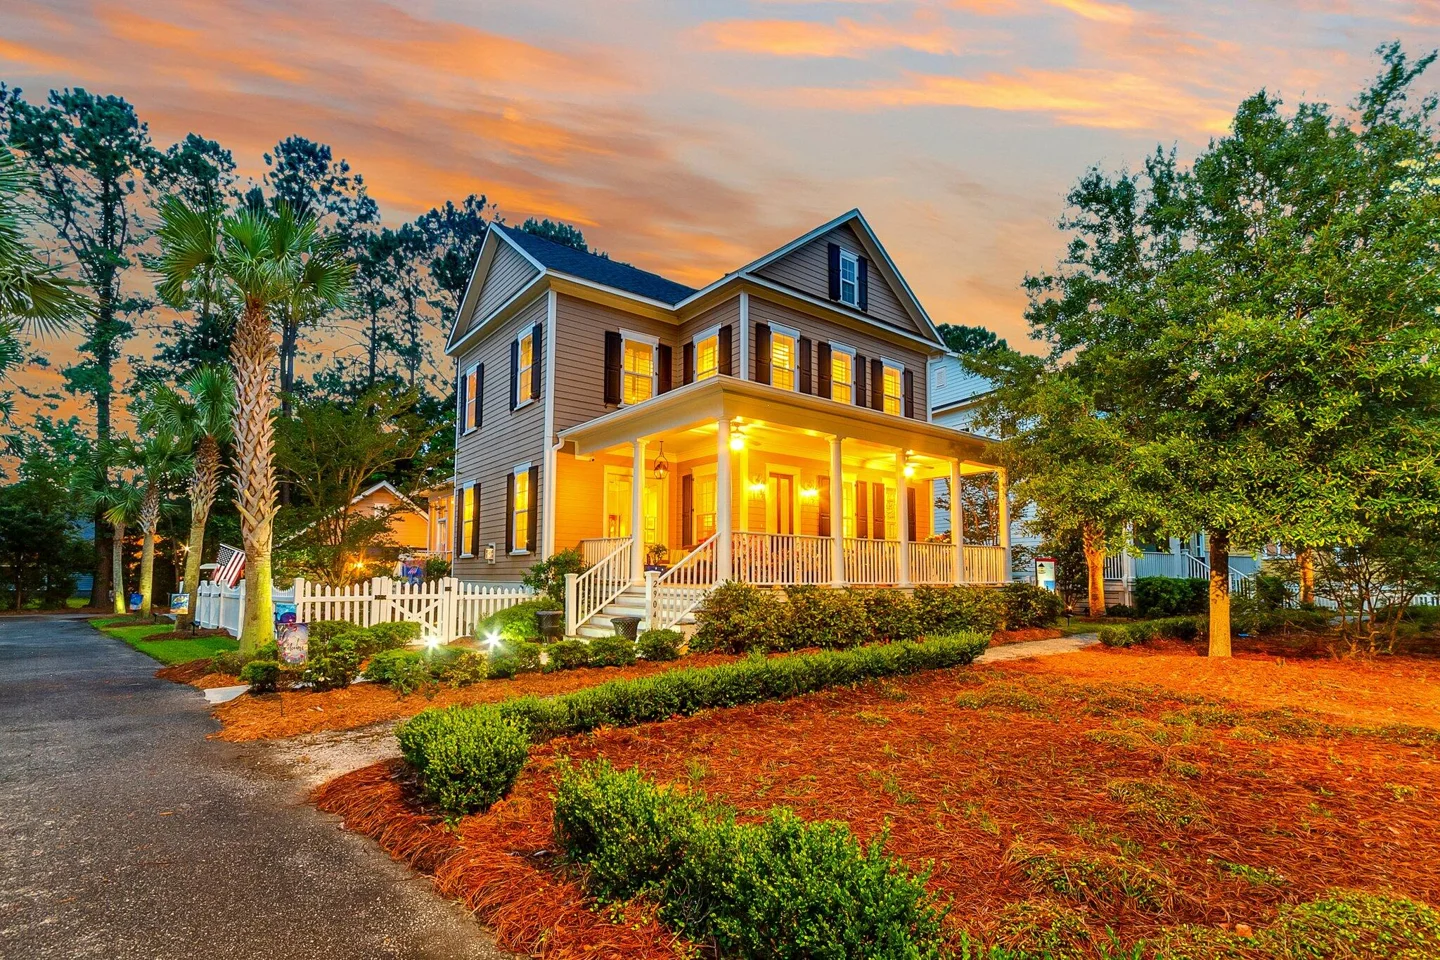 Stunning 2-Story Home with Southern Charm